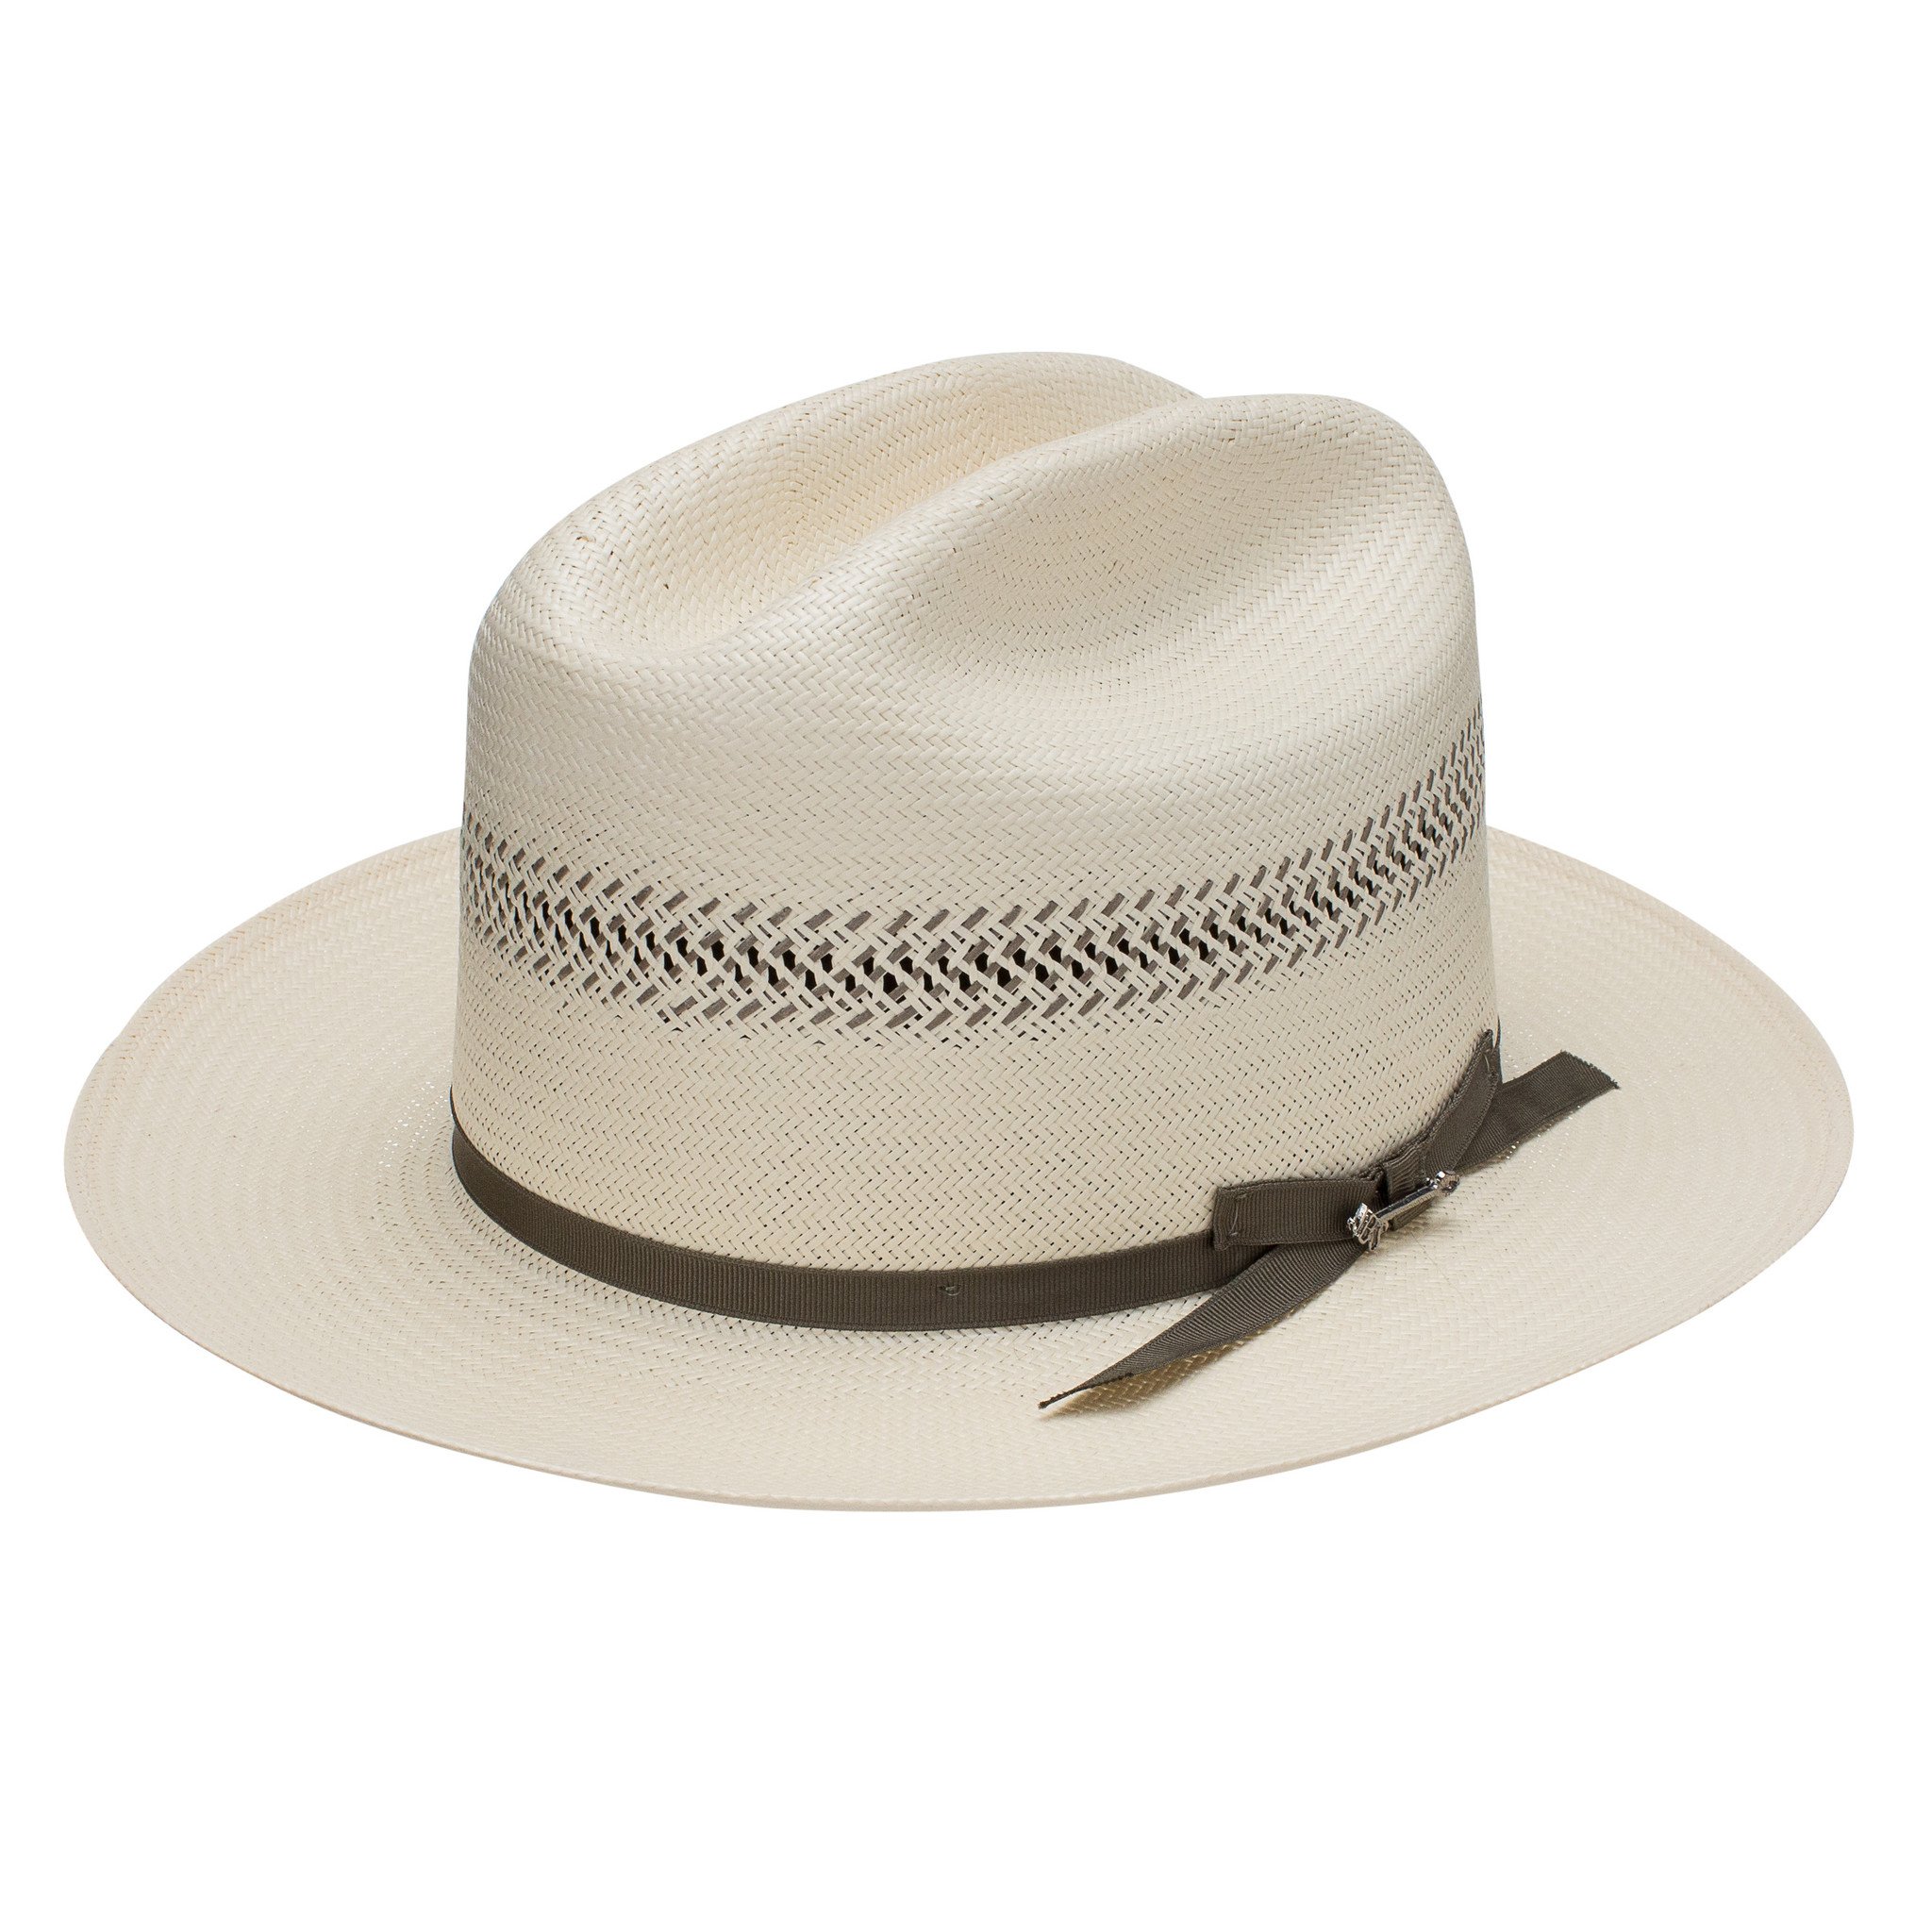 Open Road 5 Vented Straw Hat STETSON